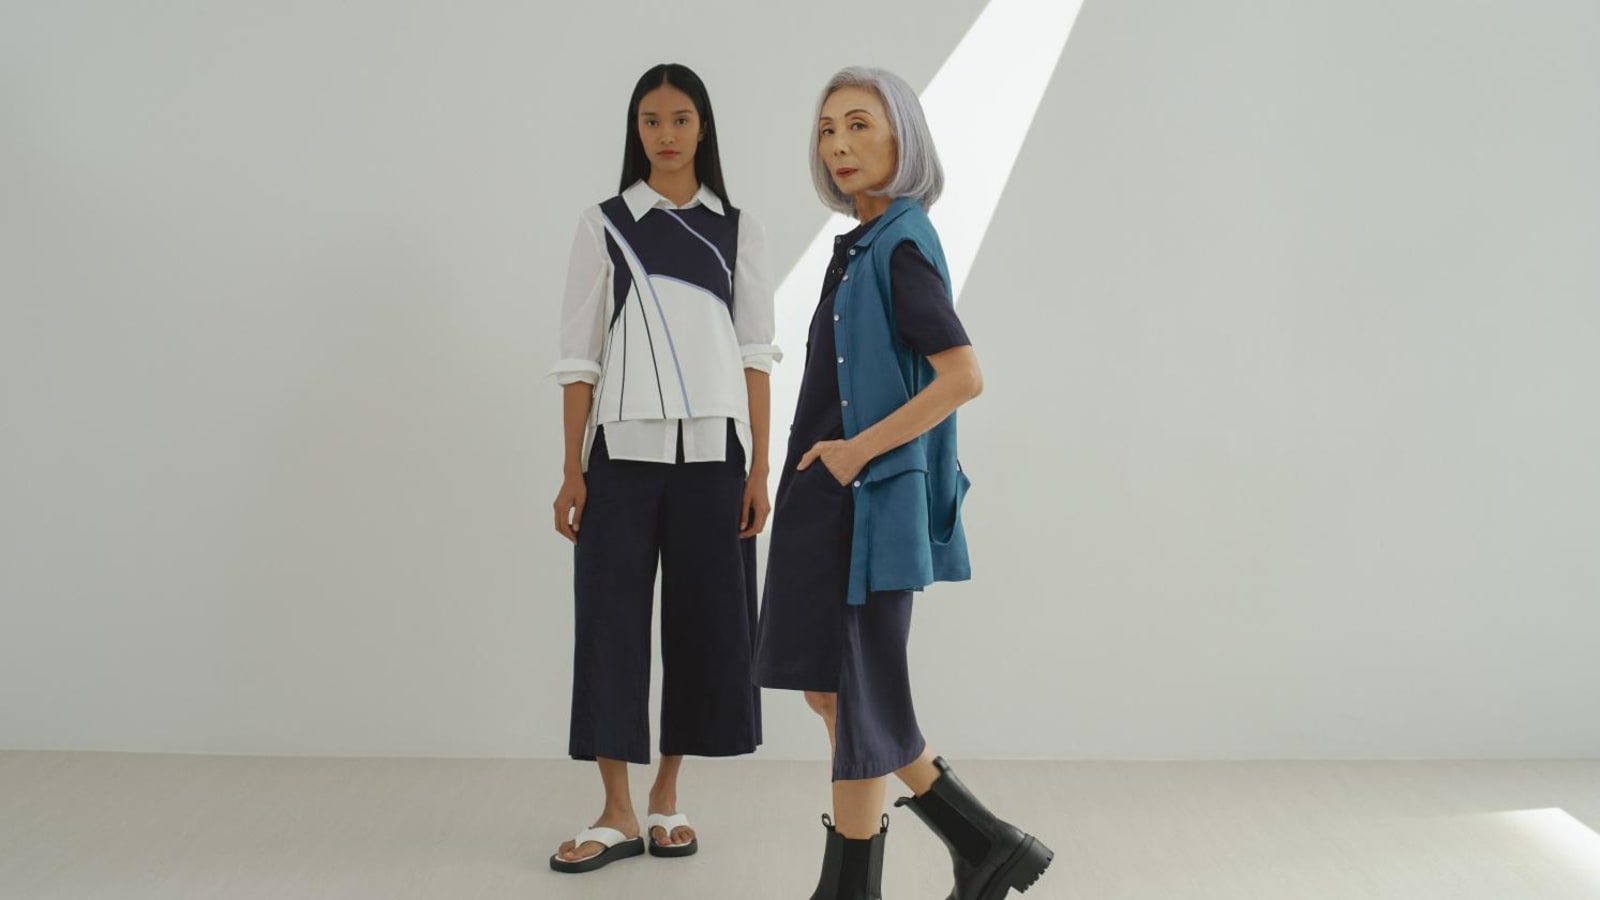 Singapore’s sexagenarian model Ong Bee Yan launches an ageless fashion capsule with local label